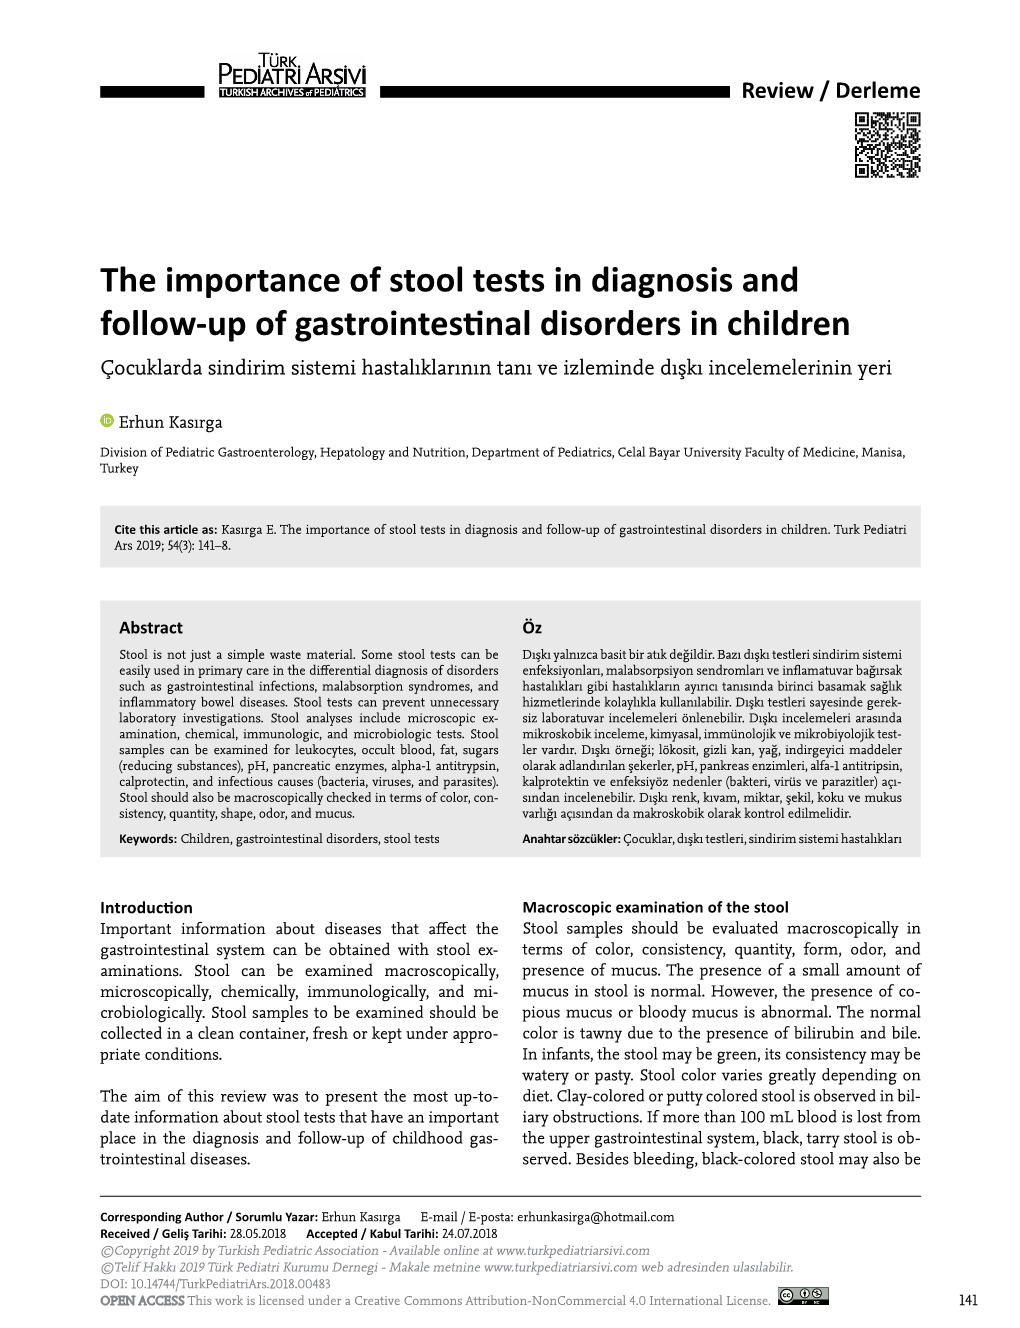 The Importance of Stool Tests in Diagnosis and Follow-Up of Gastrointestinal Disorders in Children